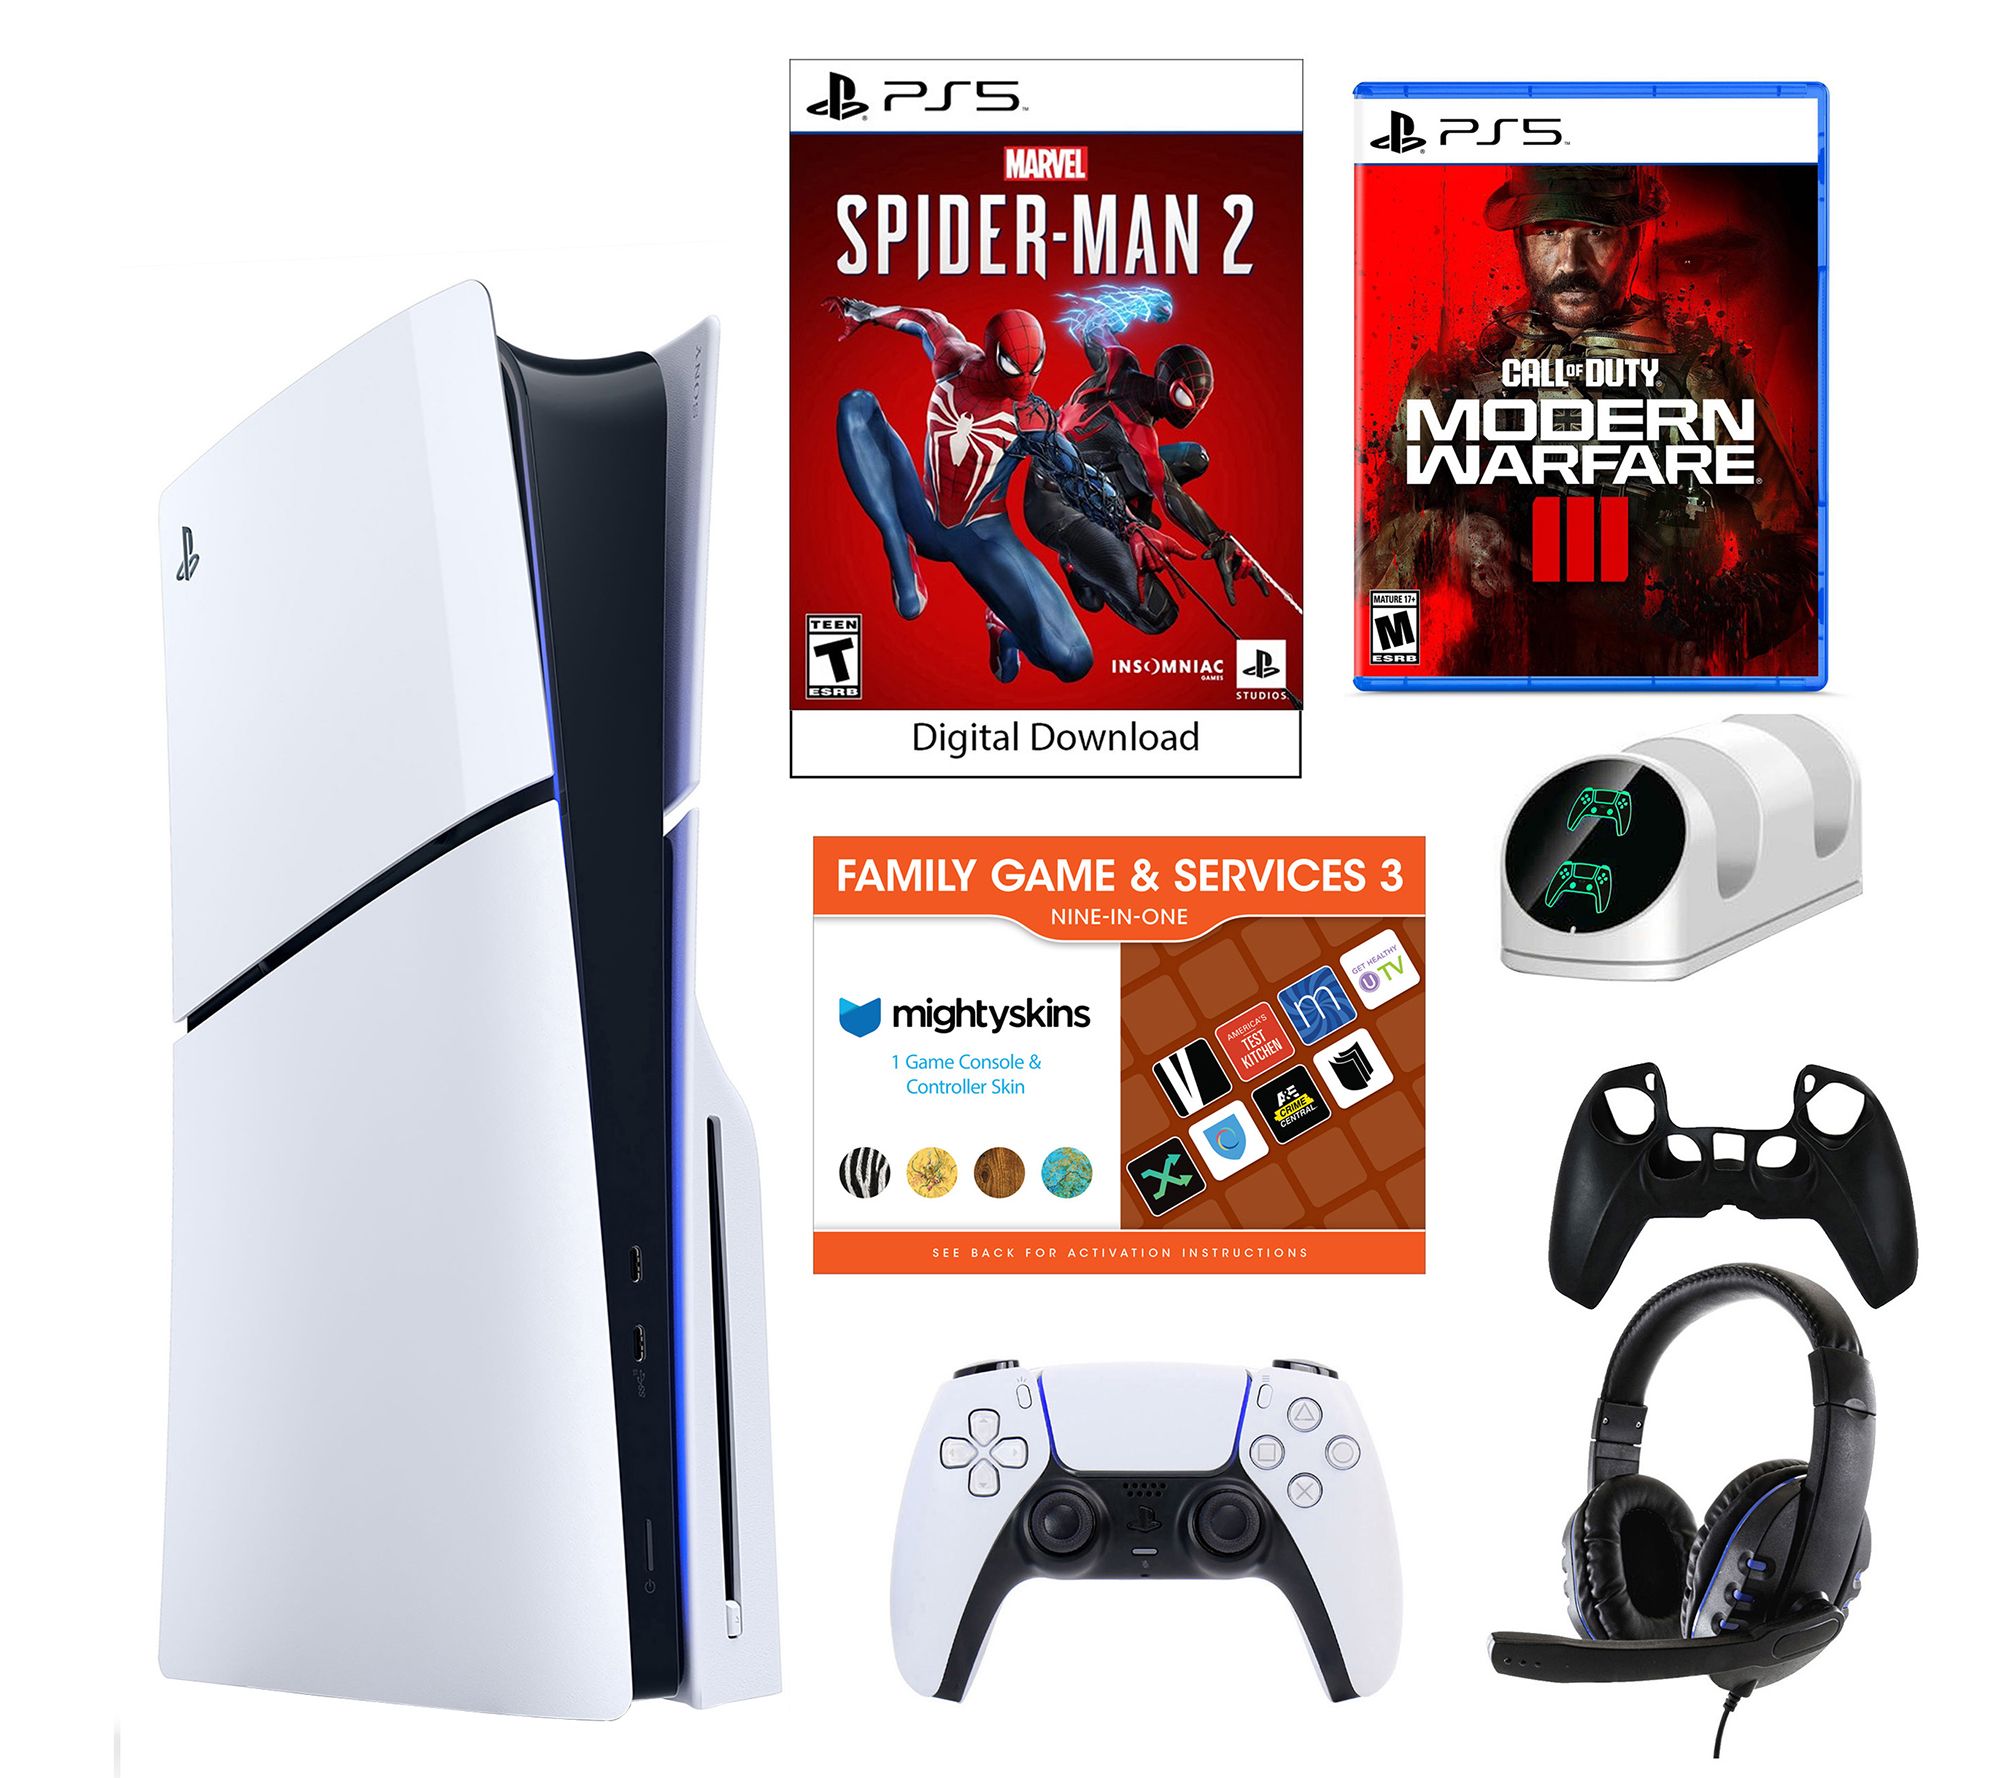 PlayStation VR2 Horizon Call of the Mountain Bundle 